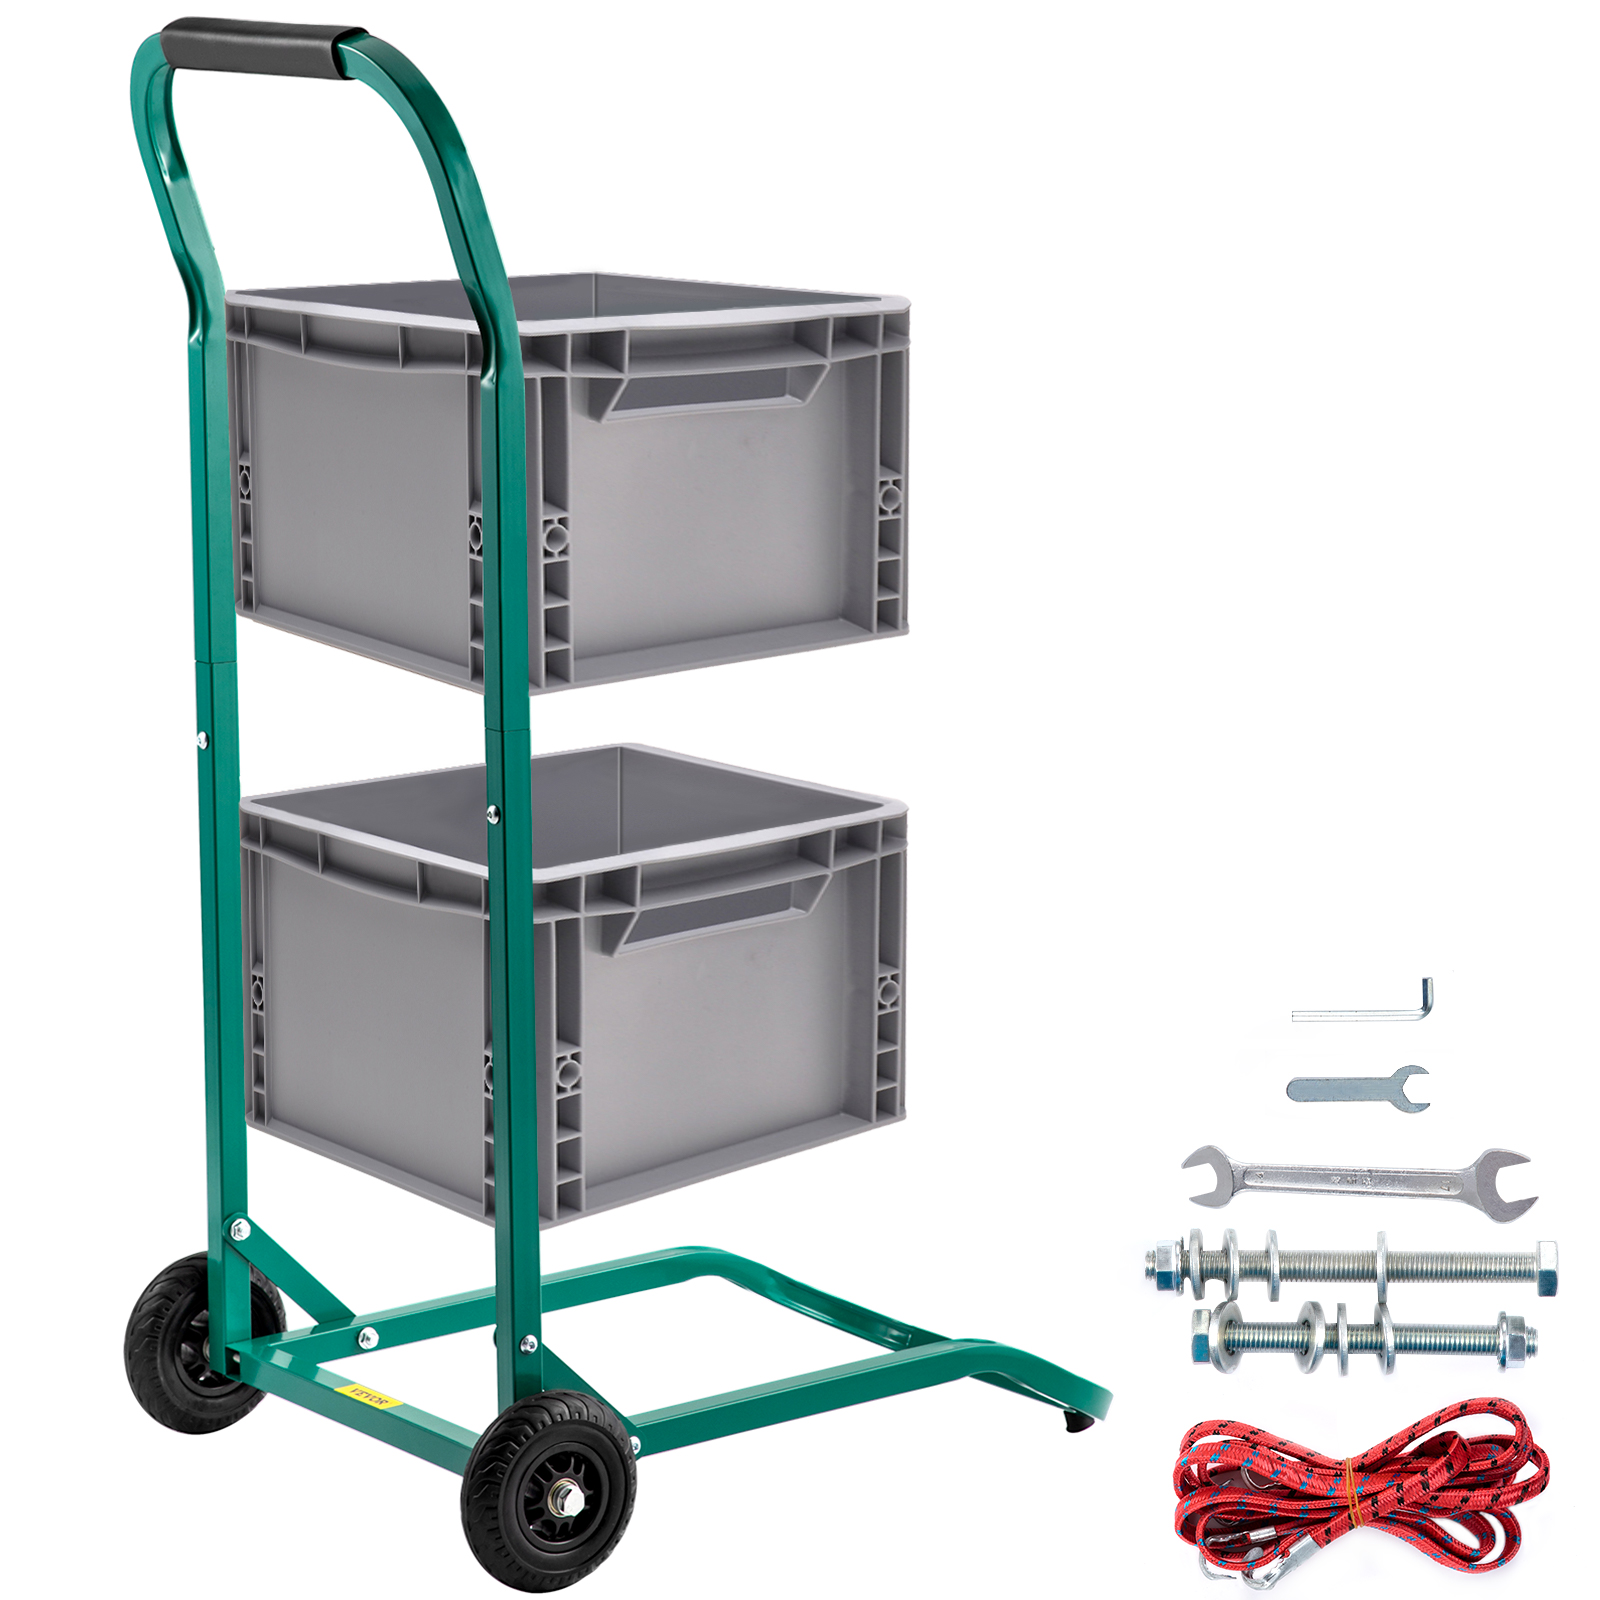 VEVOR Recycling Cart Steel Recycle Cart 22x15 In for Recycle Bins 2 Wheels от Vevor Many GEOs